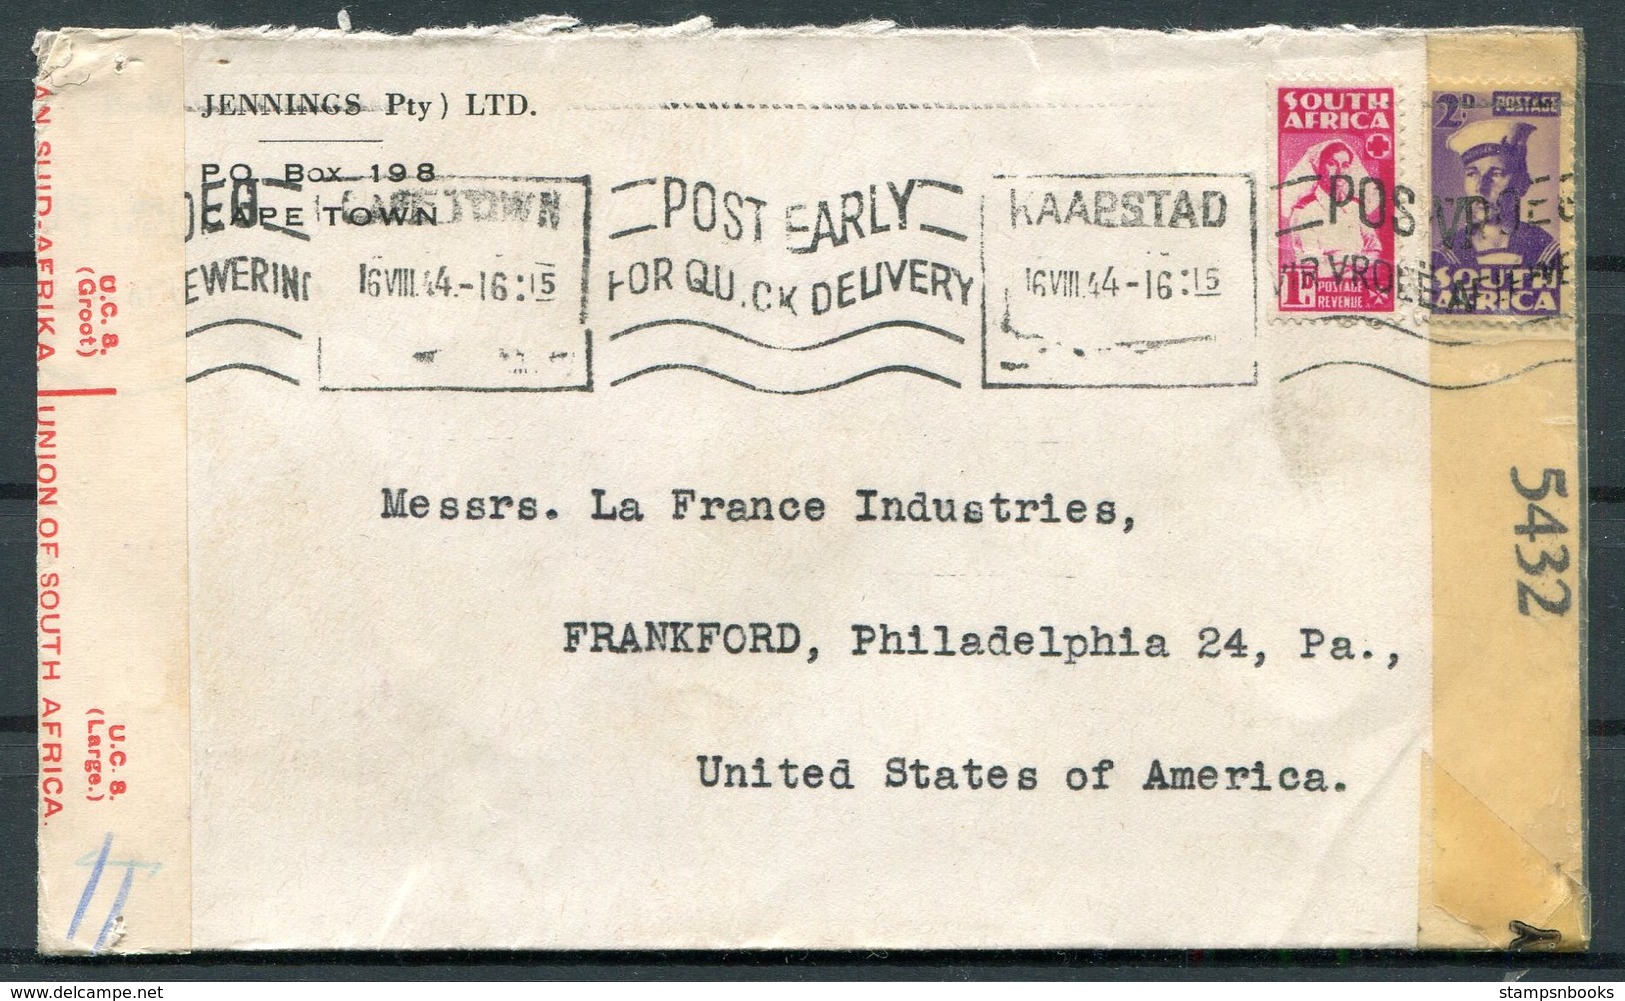 1944 South Africa Cape Town Post Early Slogan Censor Cover - Frankford PA. USA - Covers & Documents